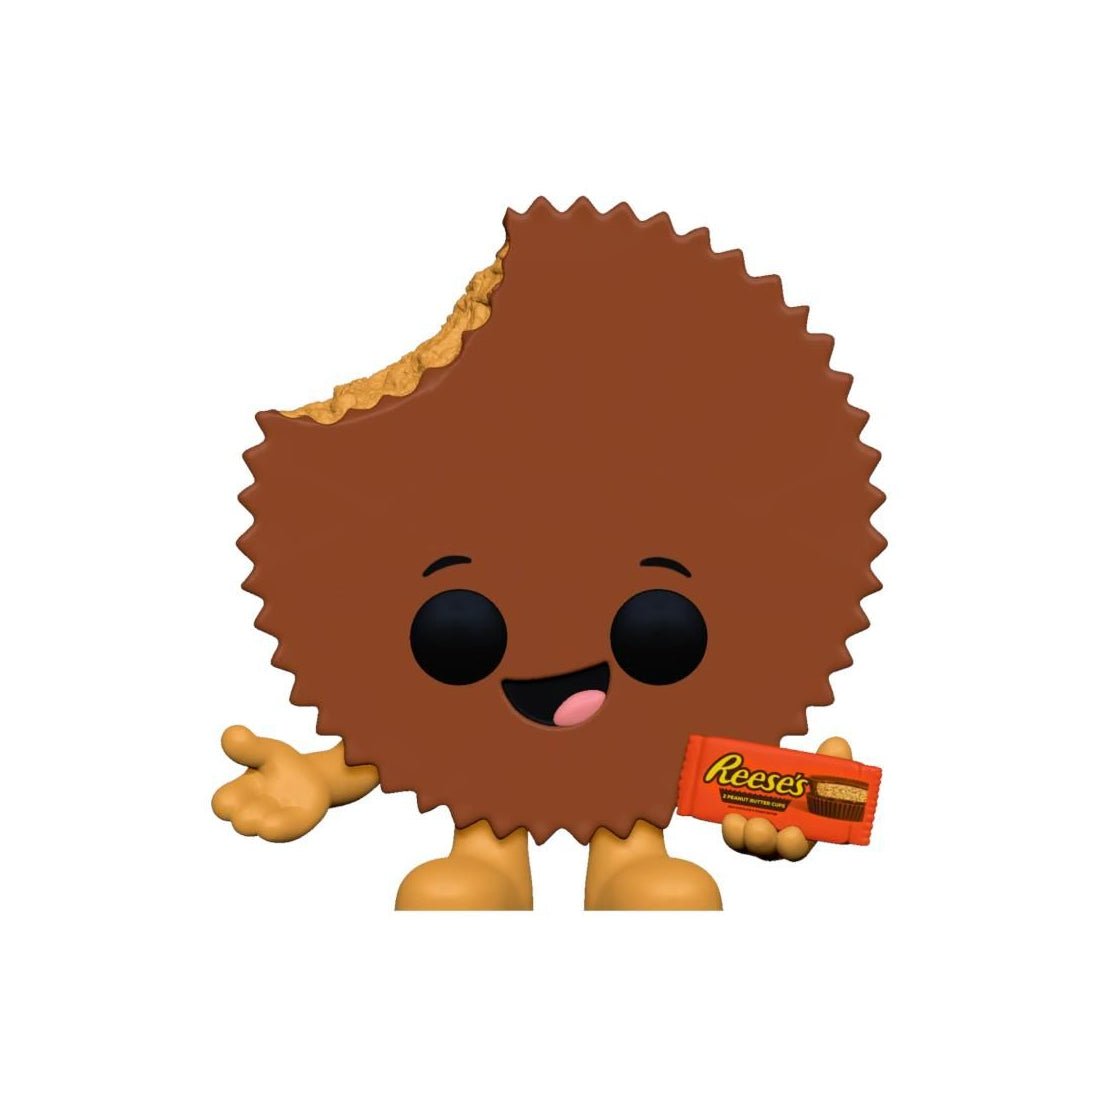 Funko Pop! Icons: Reese's - Candy Package #198 - دمية - Store 974 | ستور ٩٧٤